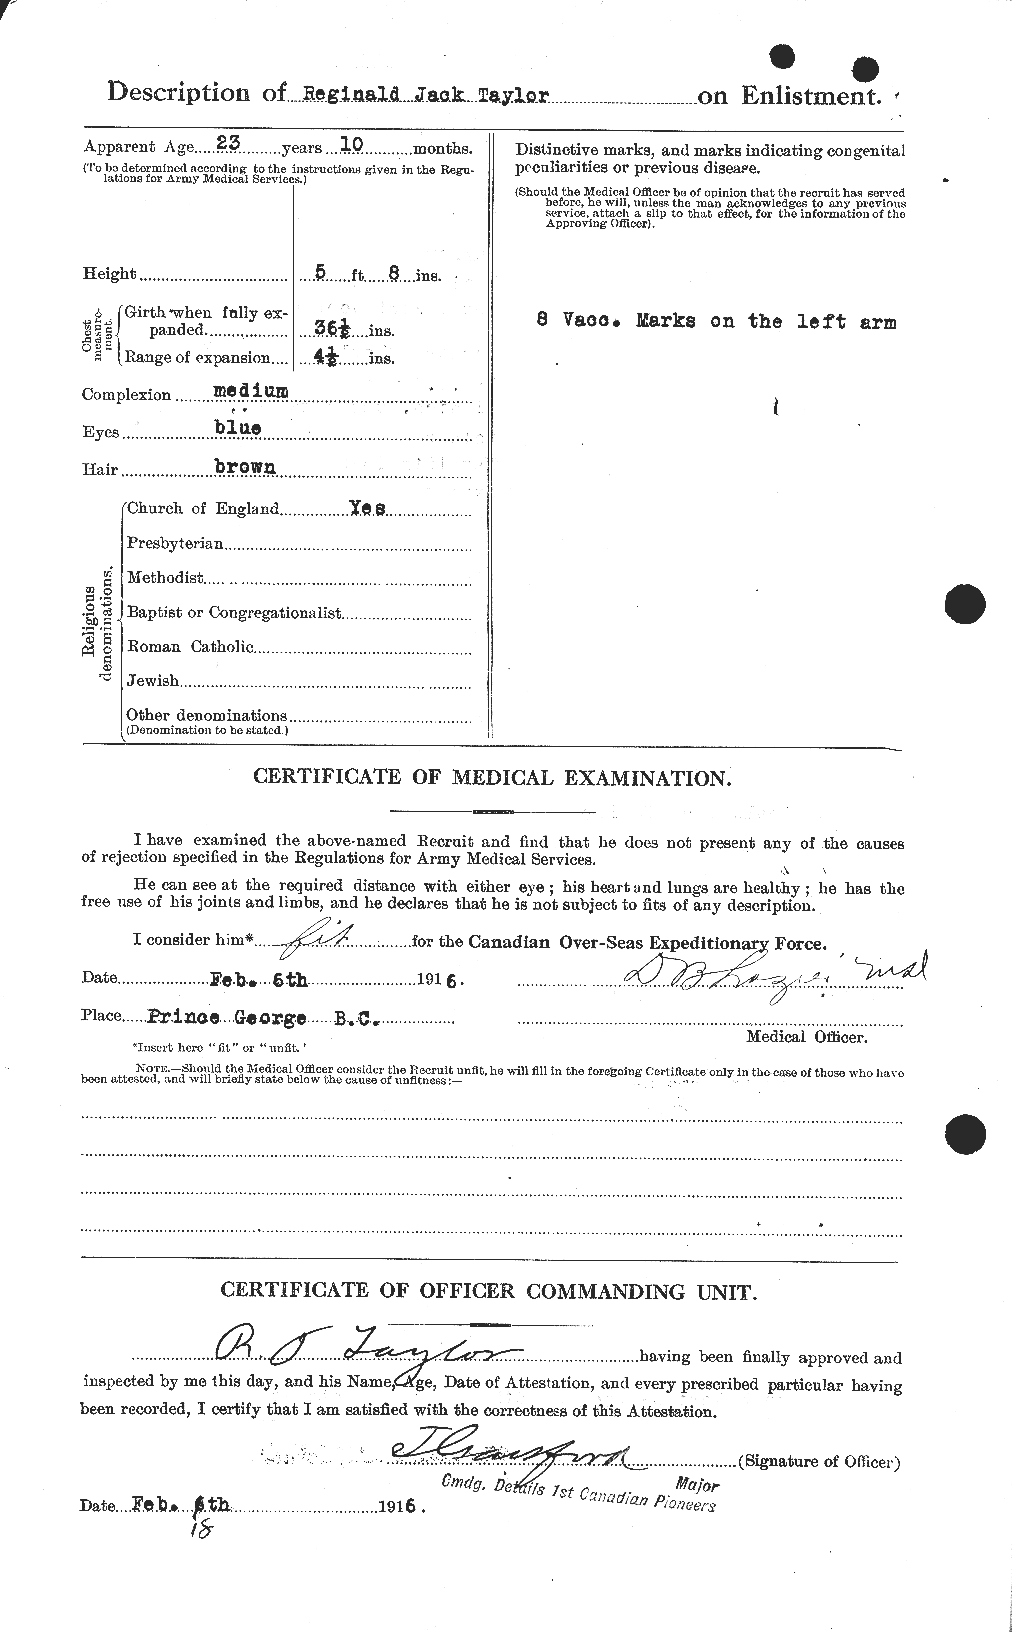 Personnel Records of the First World War - CEF 627804b